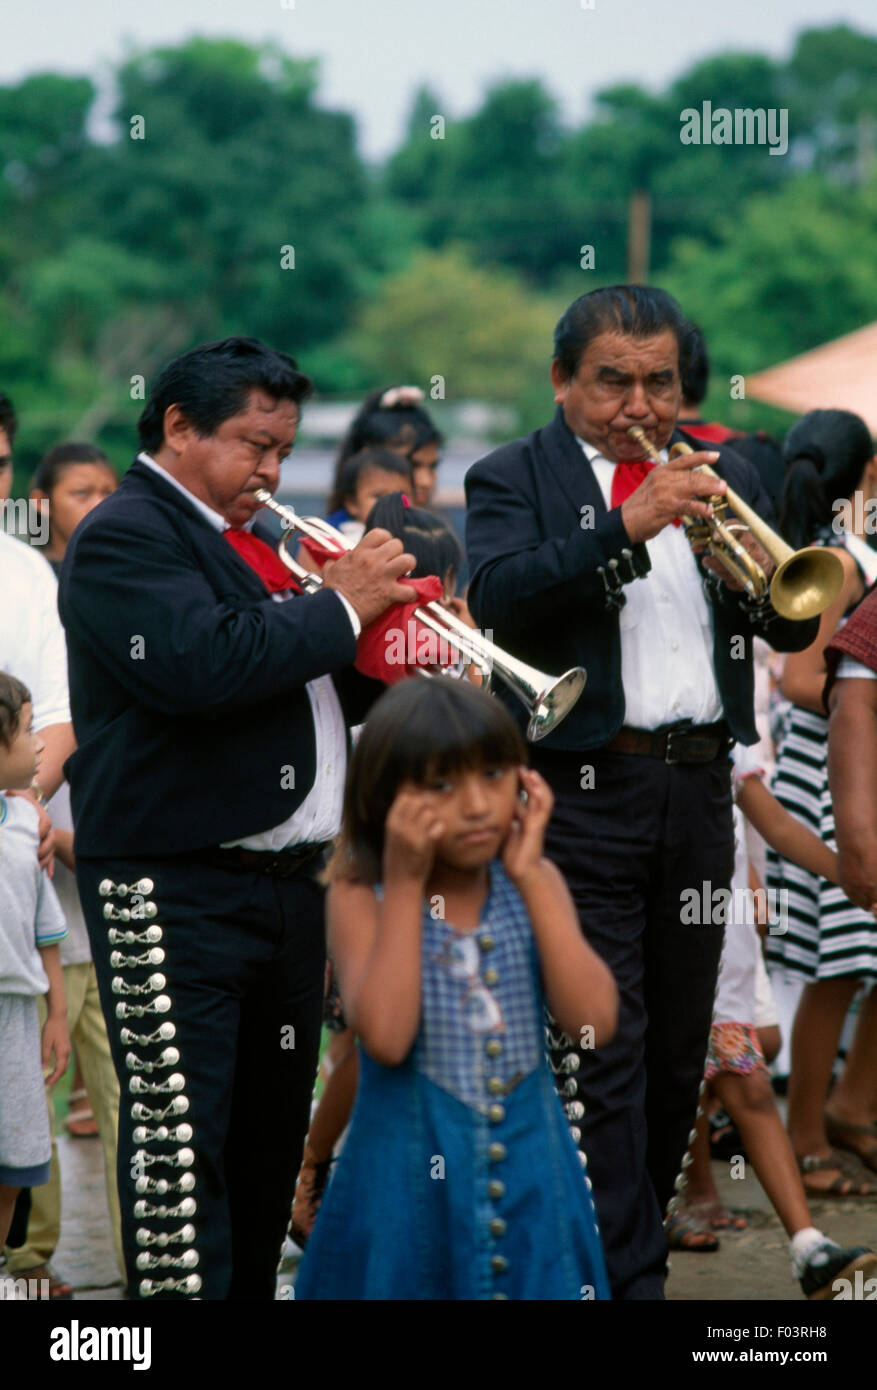 Mariachi (trumpet players) at the Festival of the Birth of the Blessed Virgin Mary, Sotuta, Yucatan, Mexico. Stock Photo